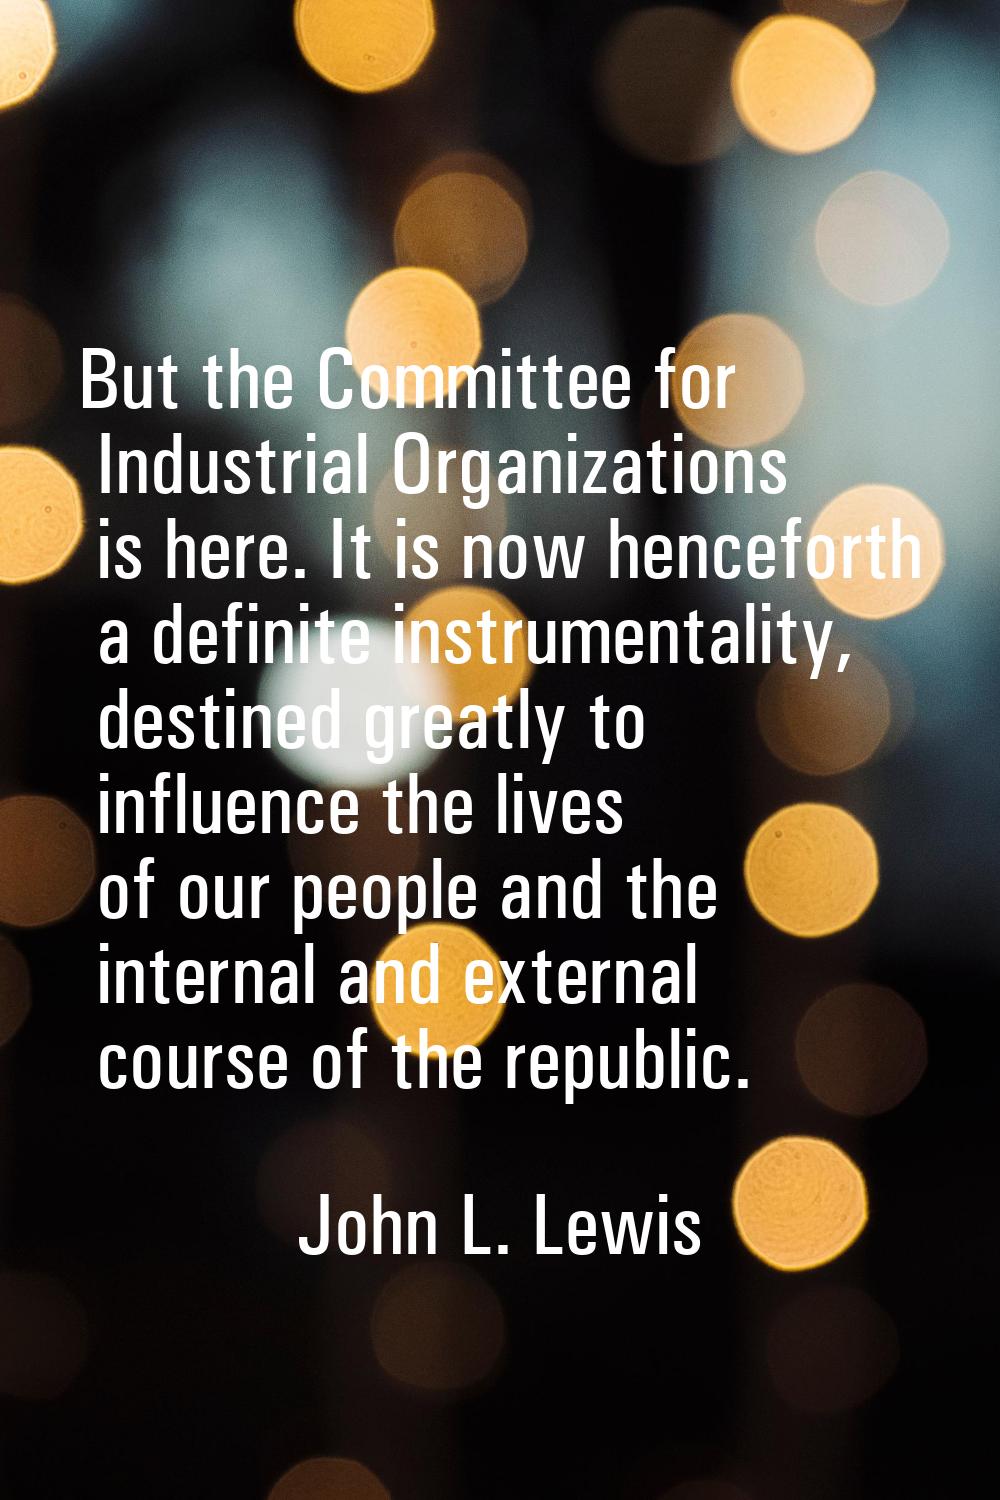 But the Committee for Industrial Organizations is here. It is now henceforth a definite instrumenta